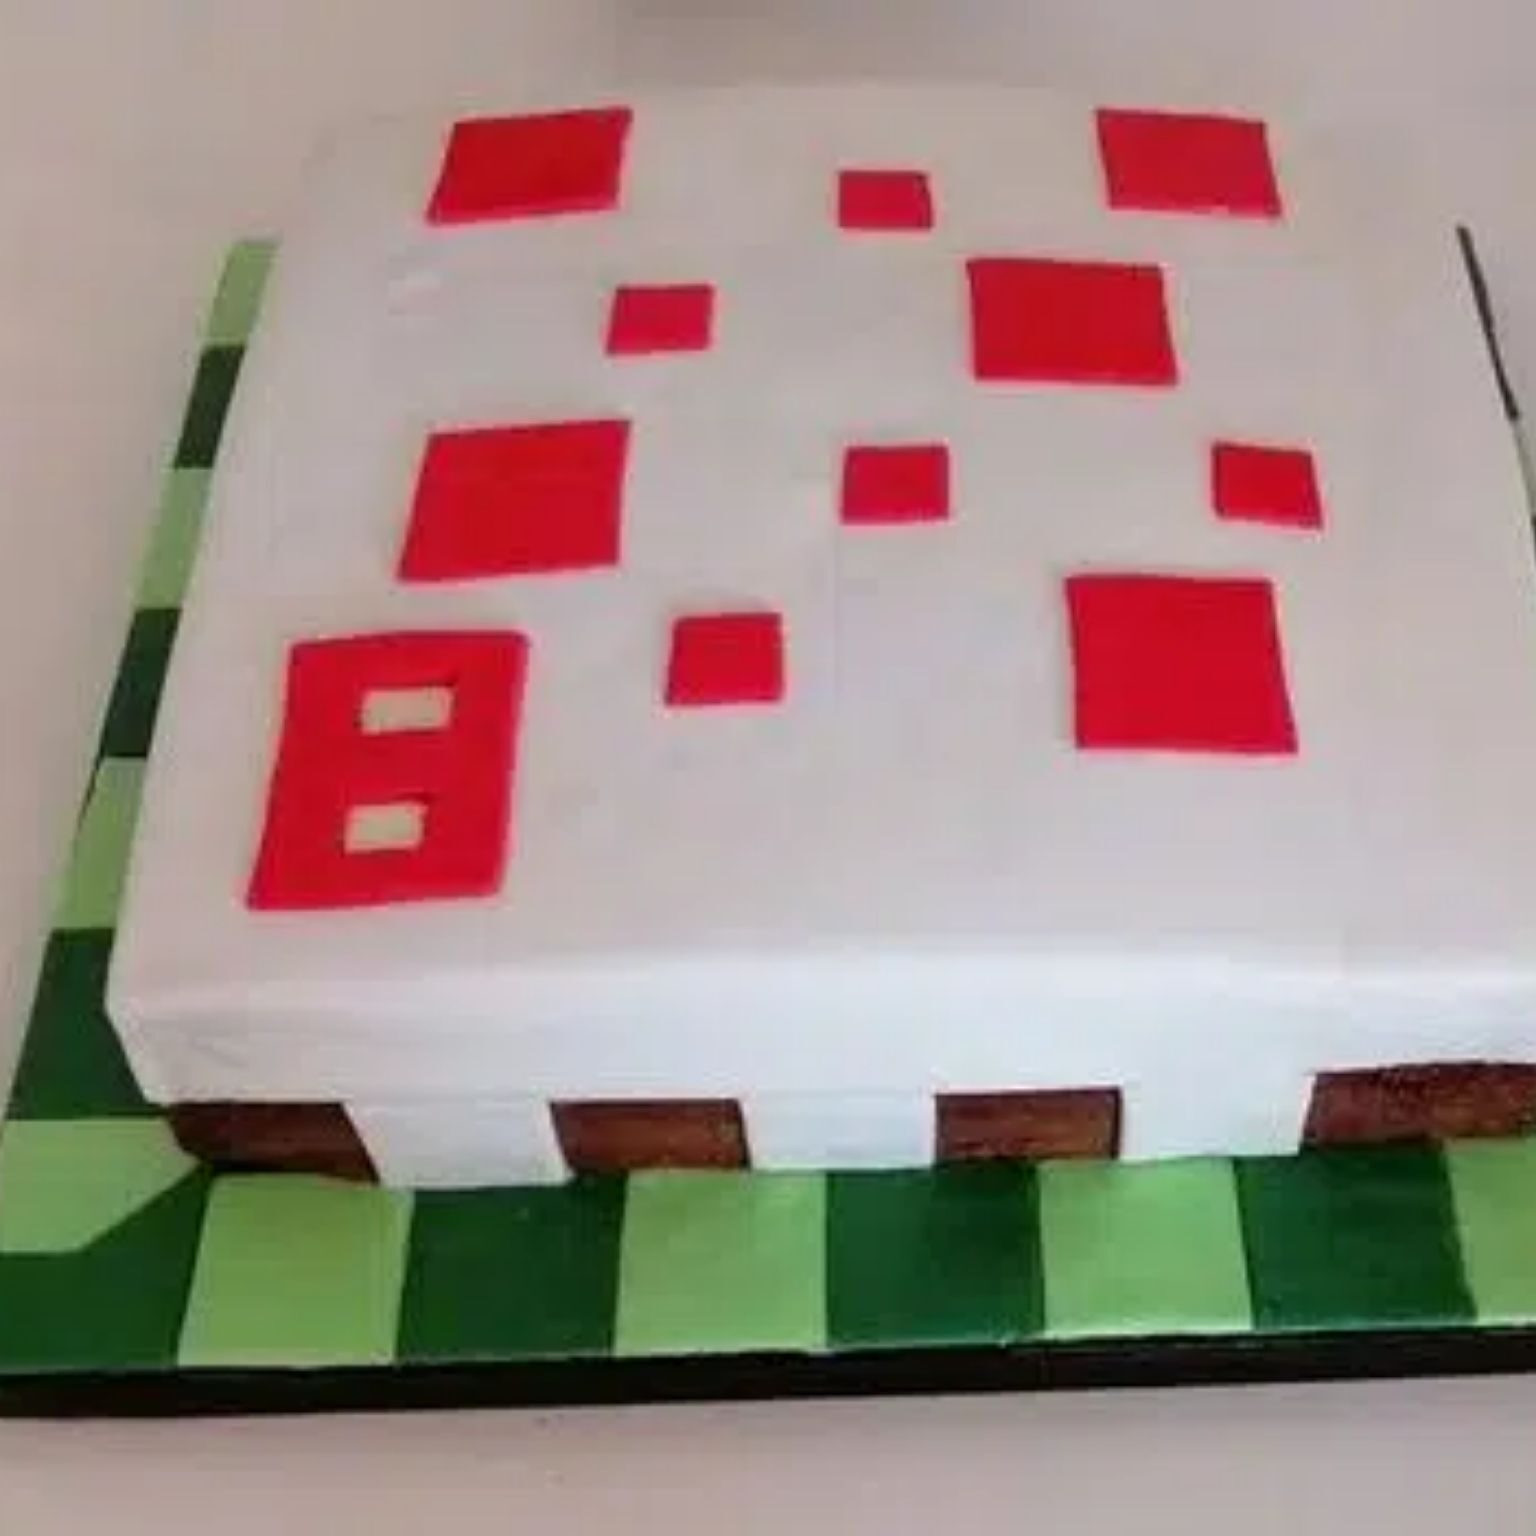 How to Make a Real Minecraft Cake